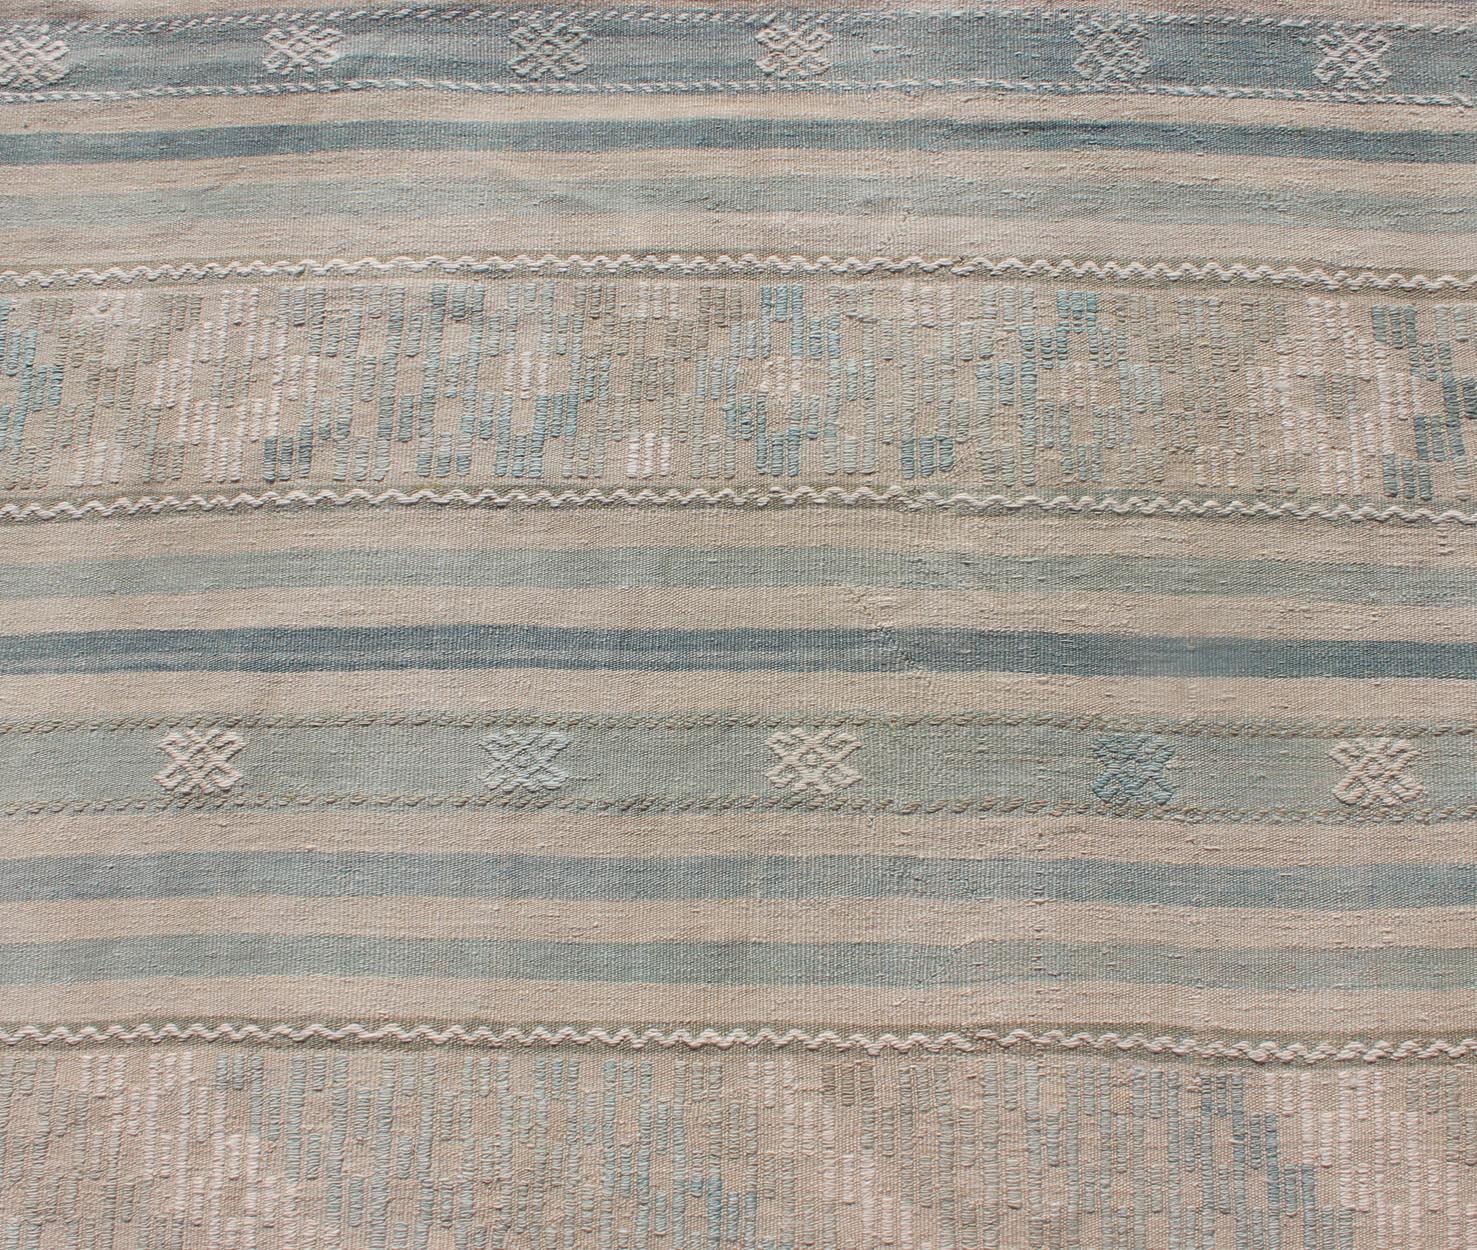 Natural-Toned Turkish Flat-Weave Kilim with Geometric Stripes Tan and Seafoam For Sale 2